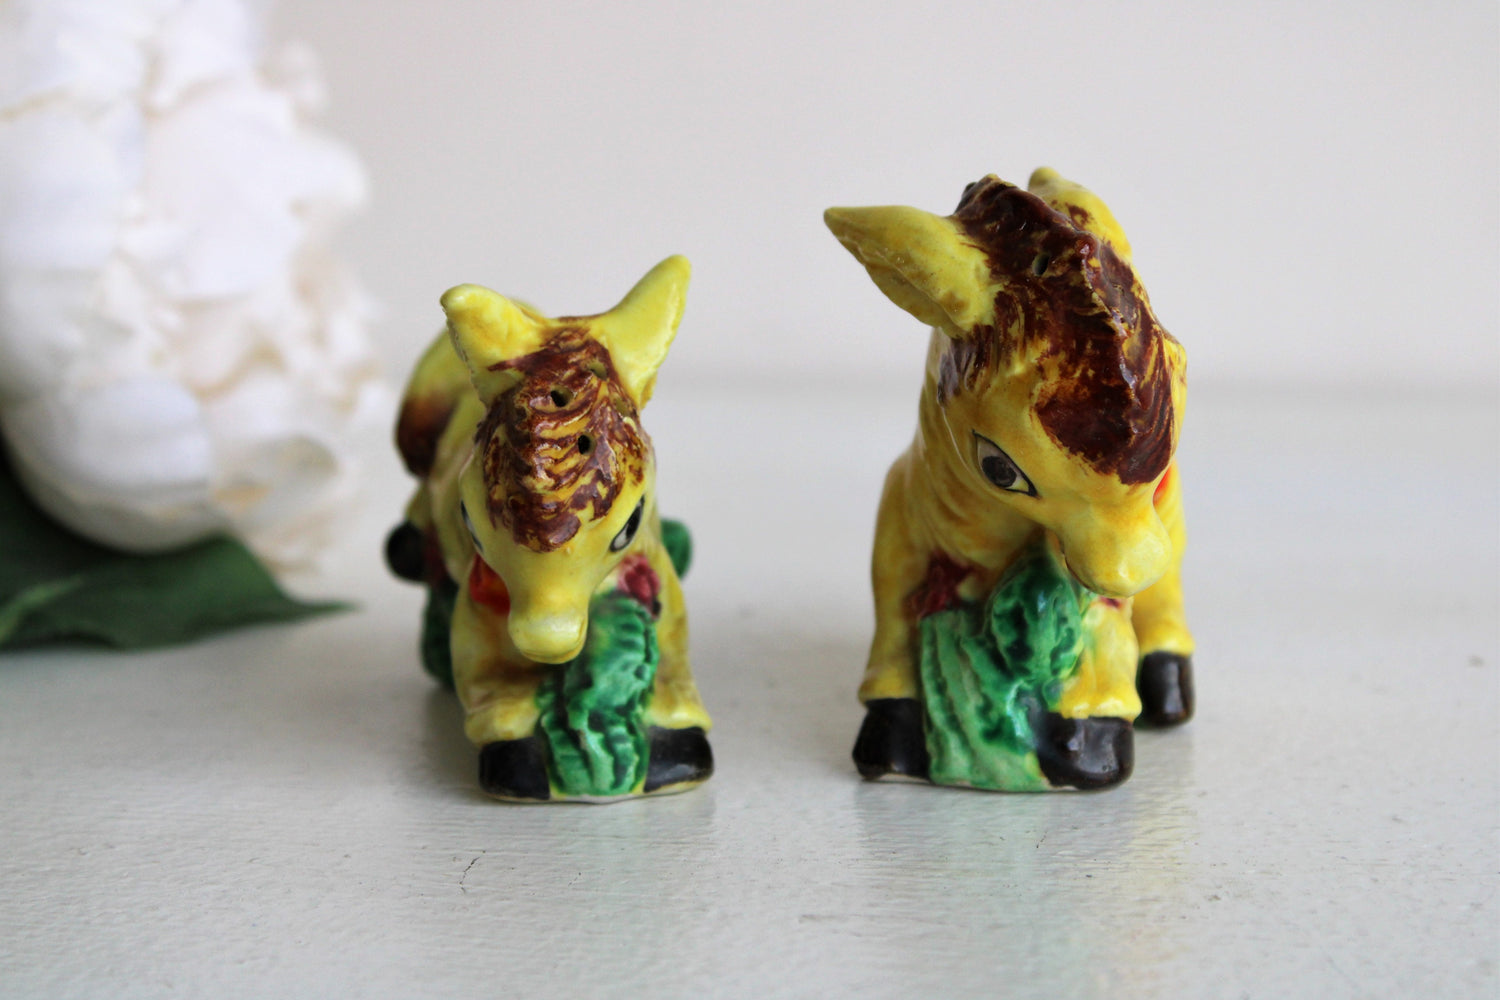 Vintage 1940s 1950s Donkey Salt and Pepper Shakers